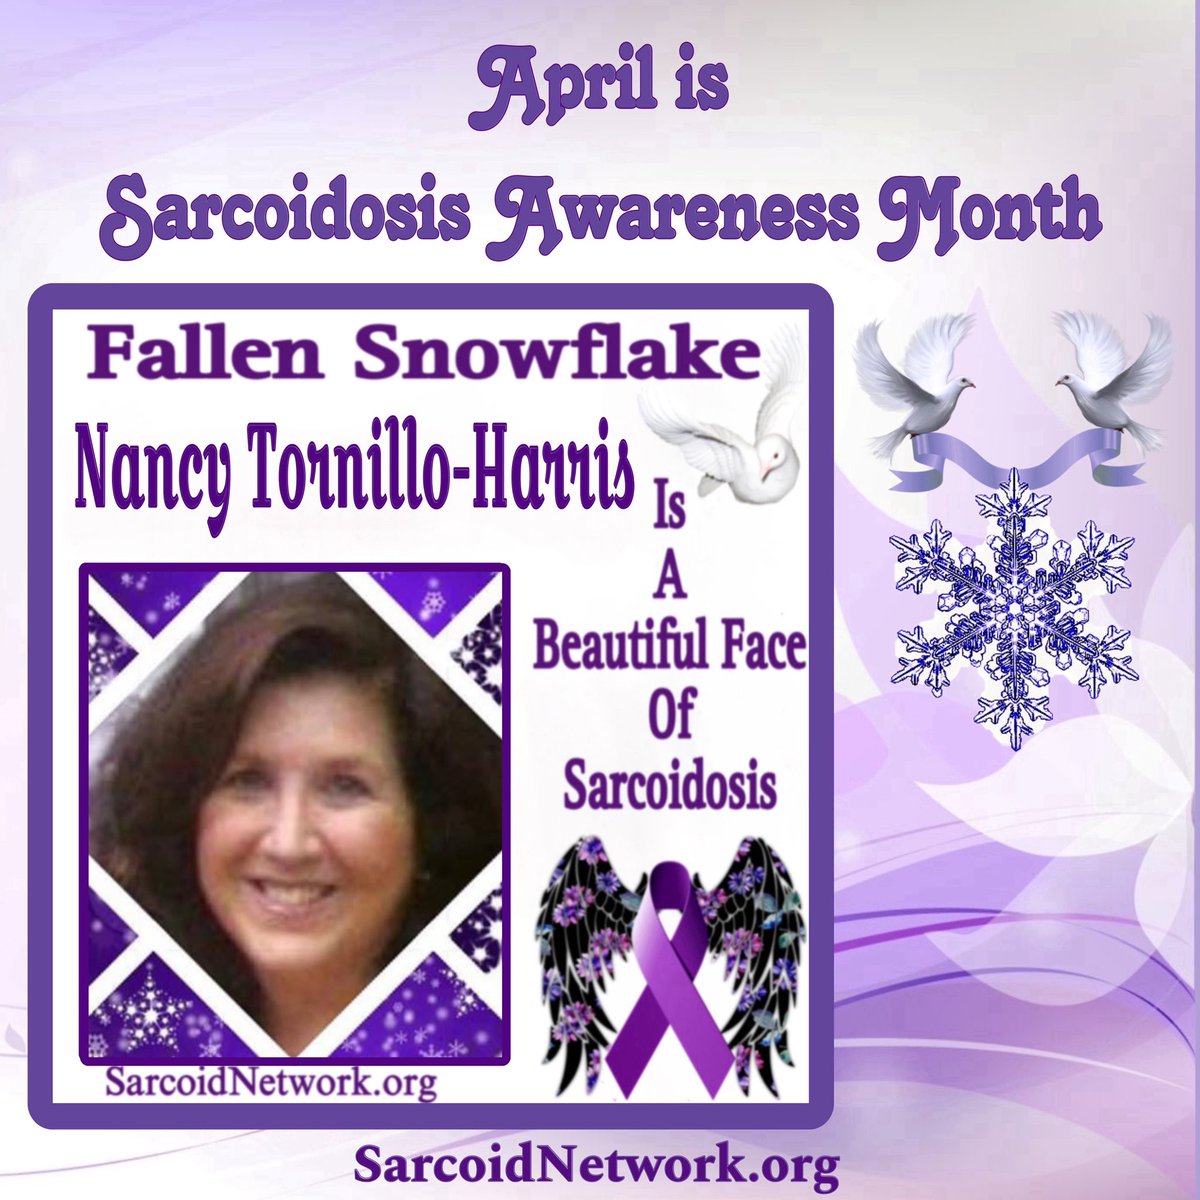 This is our Sarcoidosis Sister Fallen Snowflake Nancy Tornillo-Harris and she is a Beautiful Face of Sarcoidosis!💜 #Sarcoidosis #raredisease #preciousmemories #patientadvocate #sarcoidosisadvocate #beautifulfacesofsarcoidosis #sarcoidosisawarenessmonth